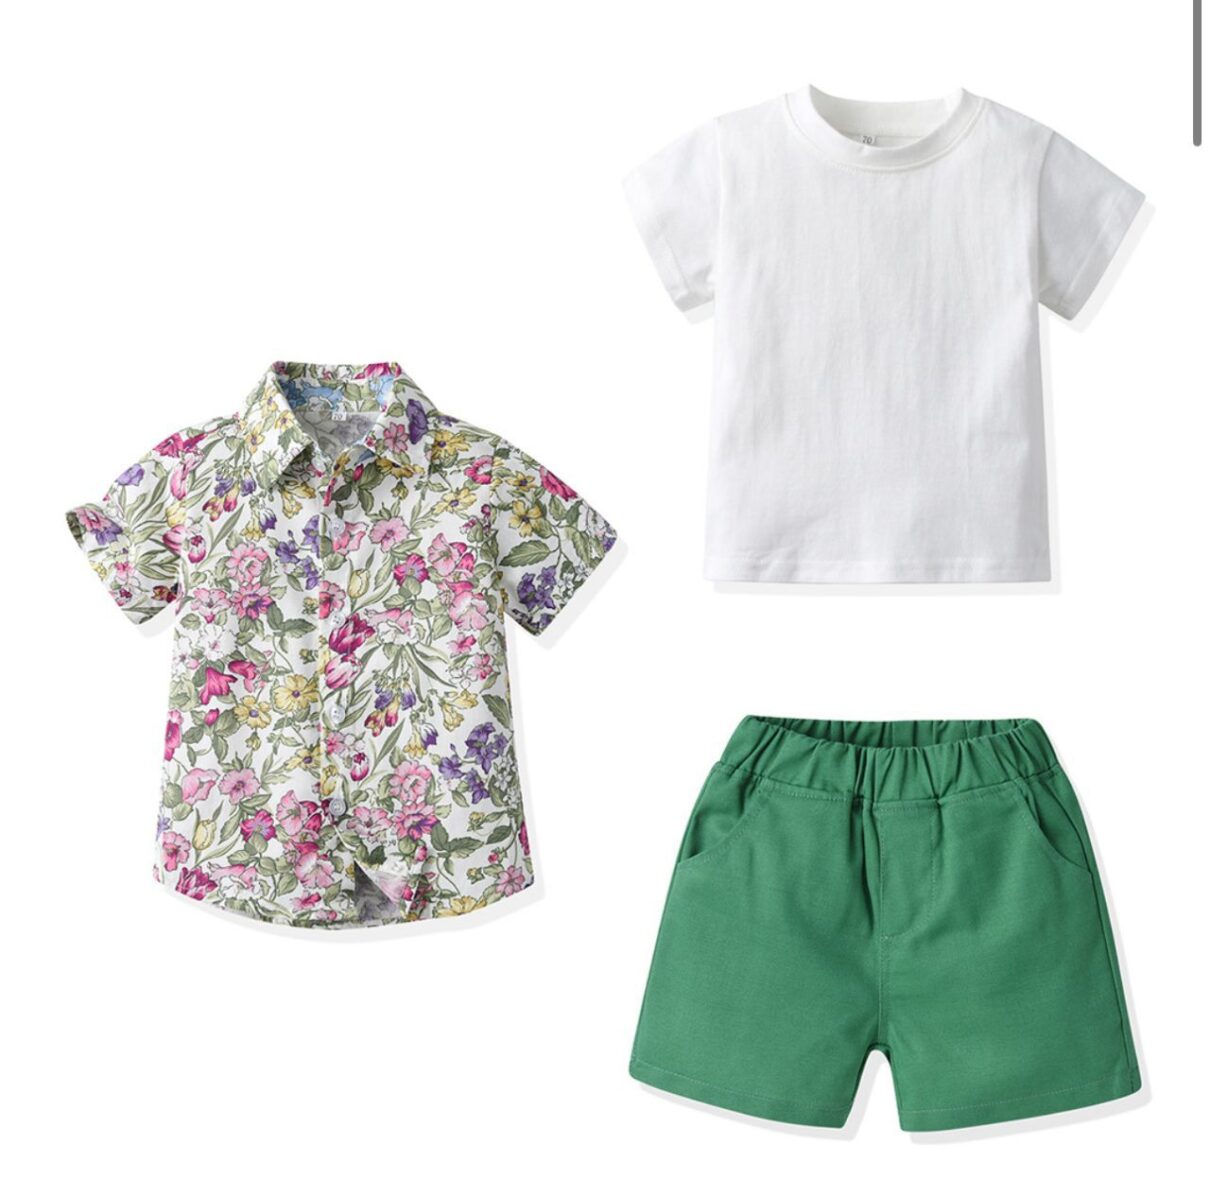 Baby Boy And Toddler Boy White Top With Vintage Shirt And Green Short 3pcs. On Mid-Year Clearance Sales